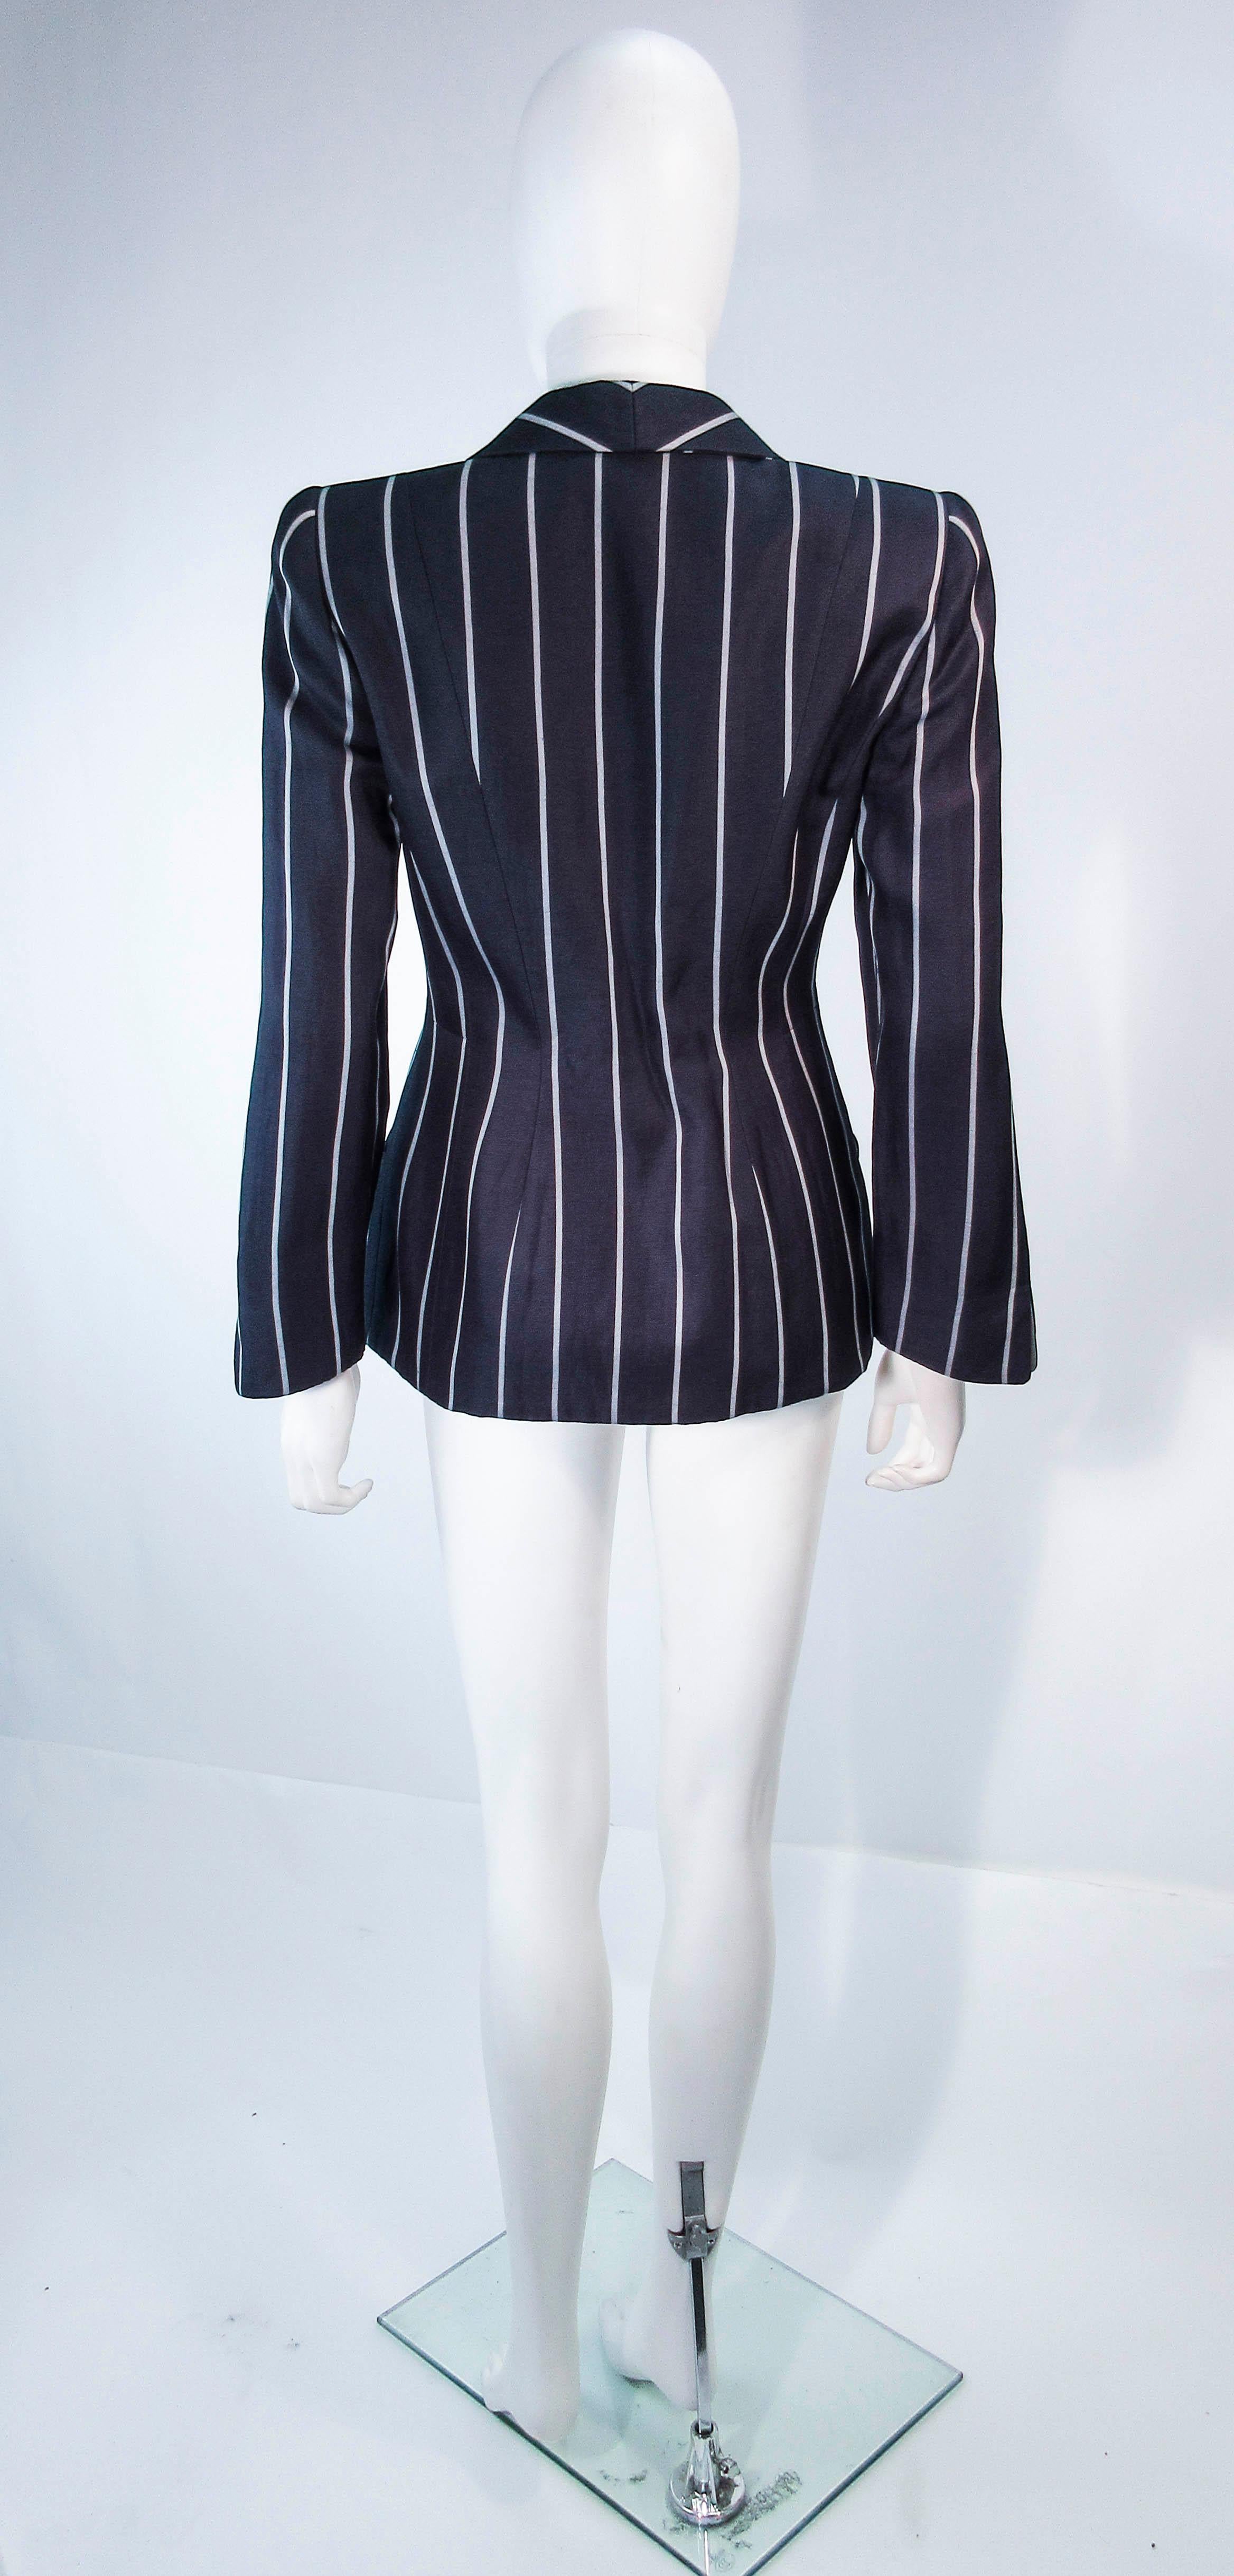 GIORGIO ARMANI Navy Striped Double Breasted Tailored Jacket Size 38 5